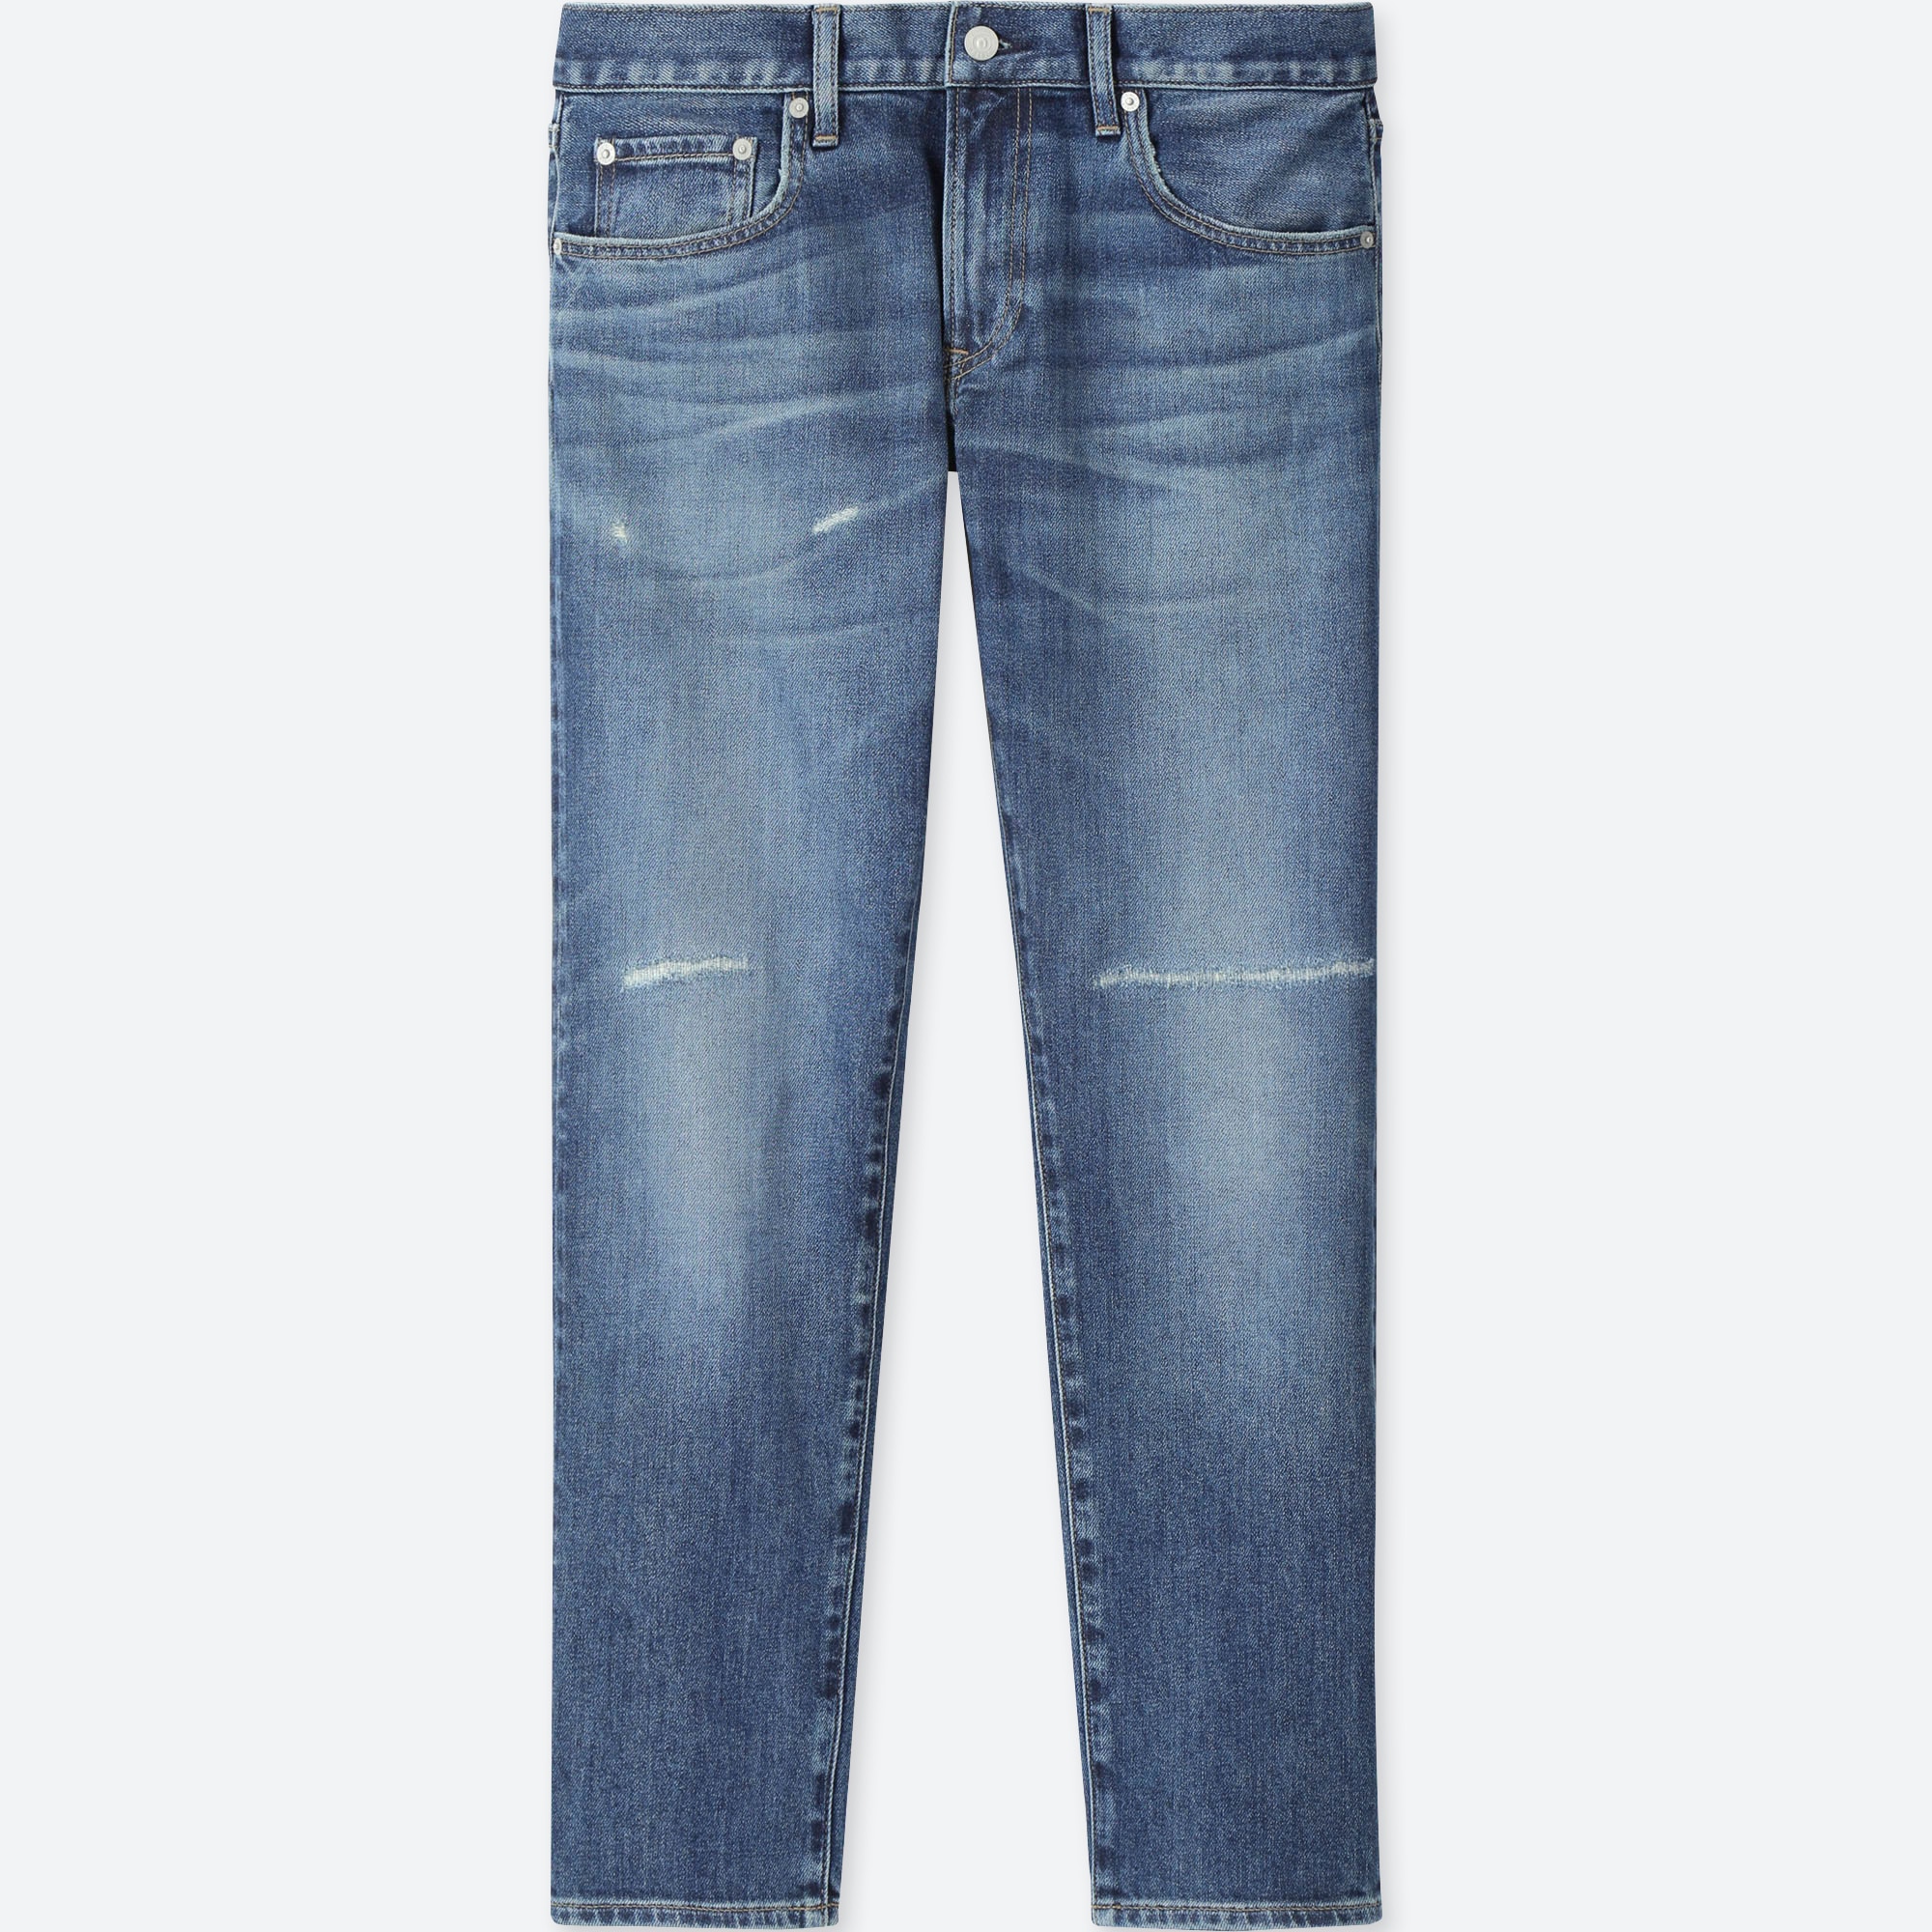 uniqlo skinny fit jeans